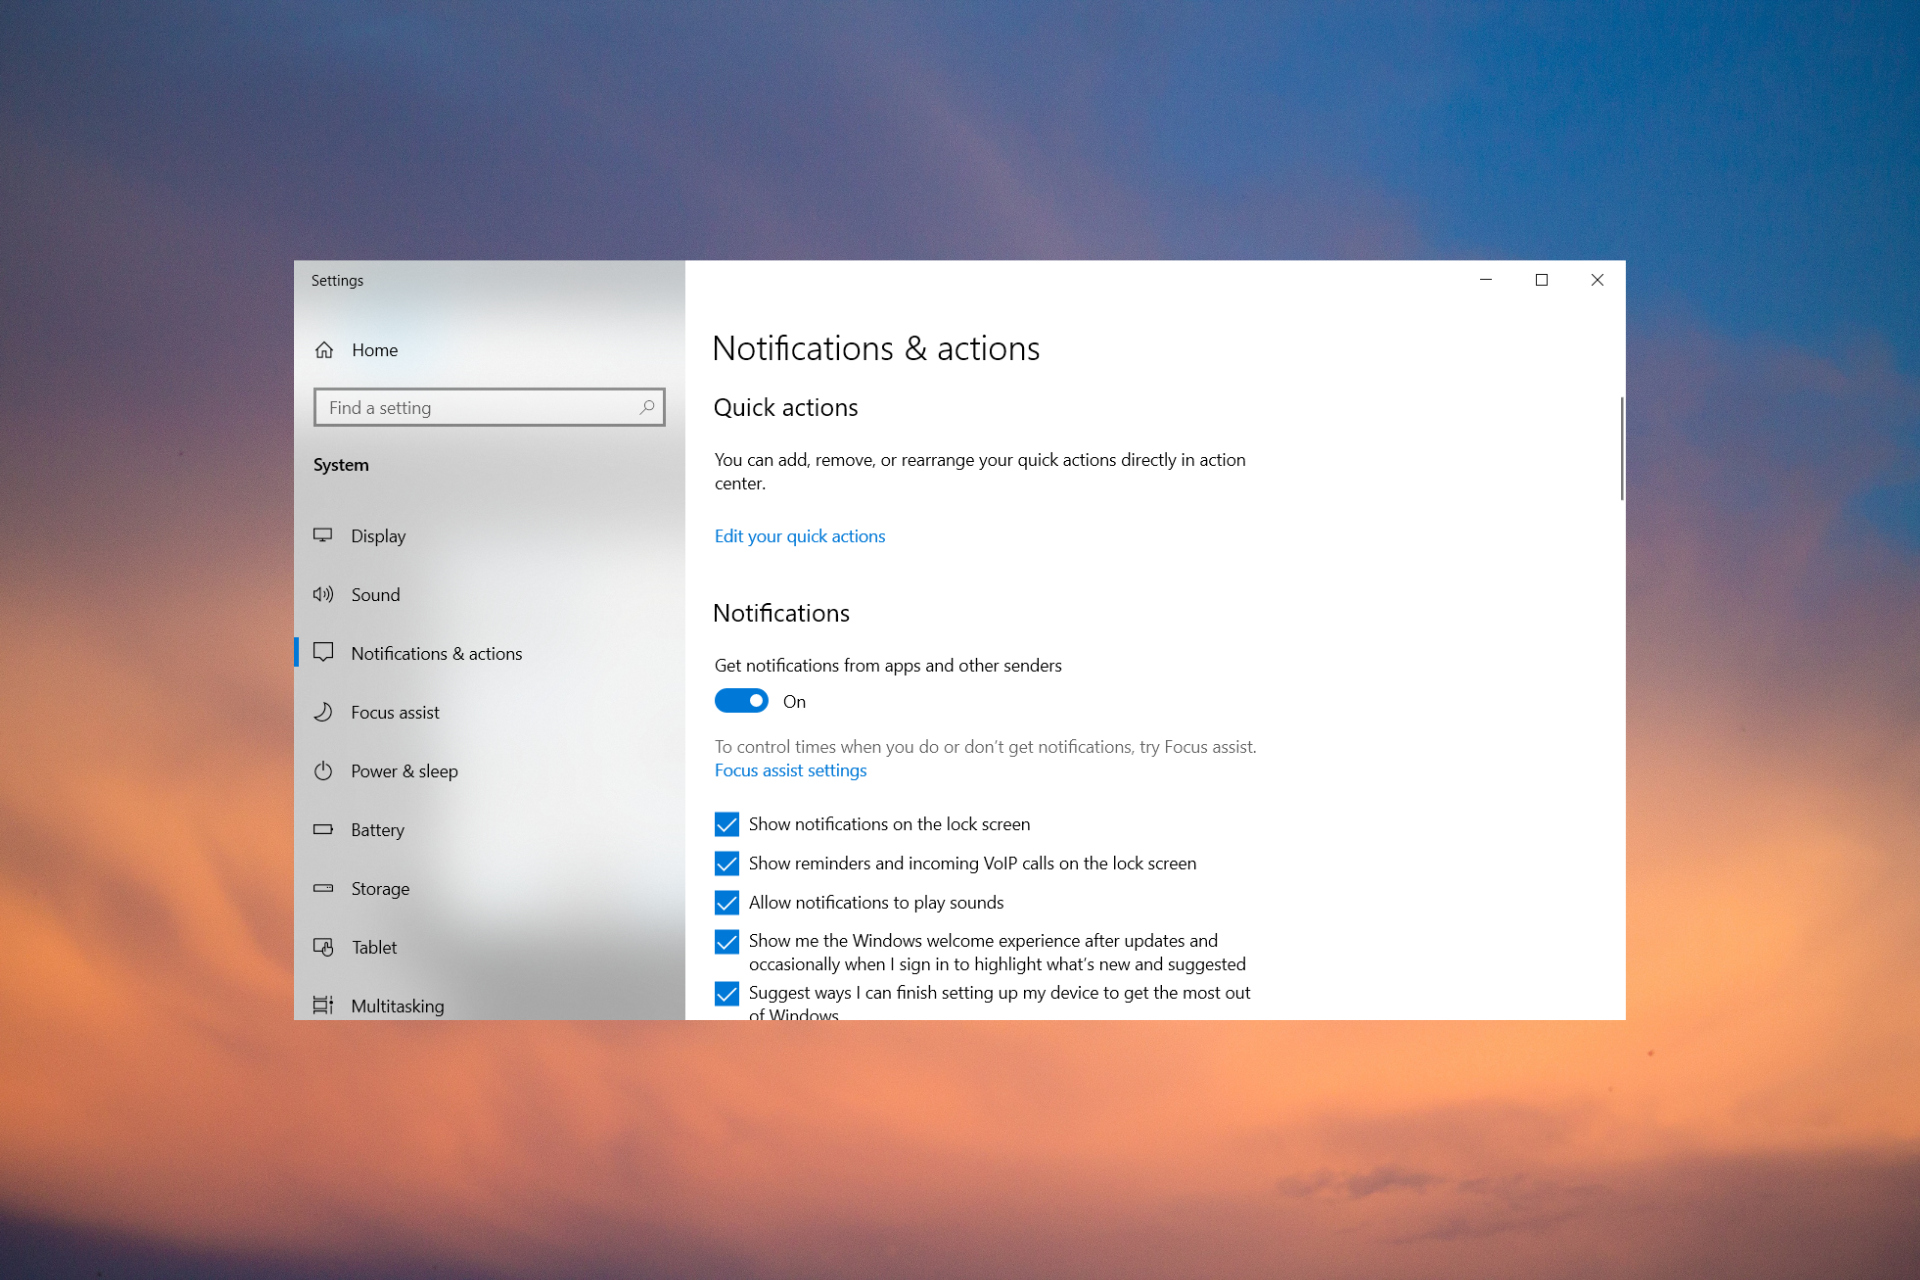 How to Fix Greyed Out Notification Settings in Windows 10